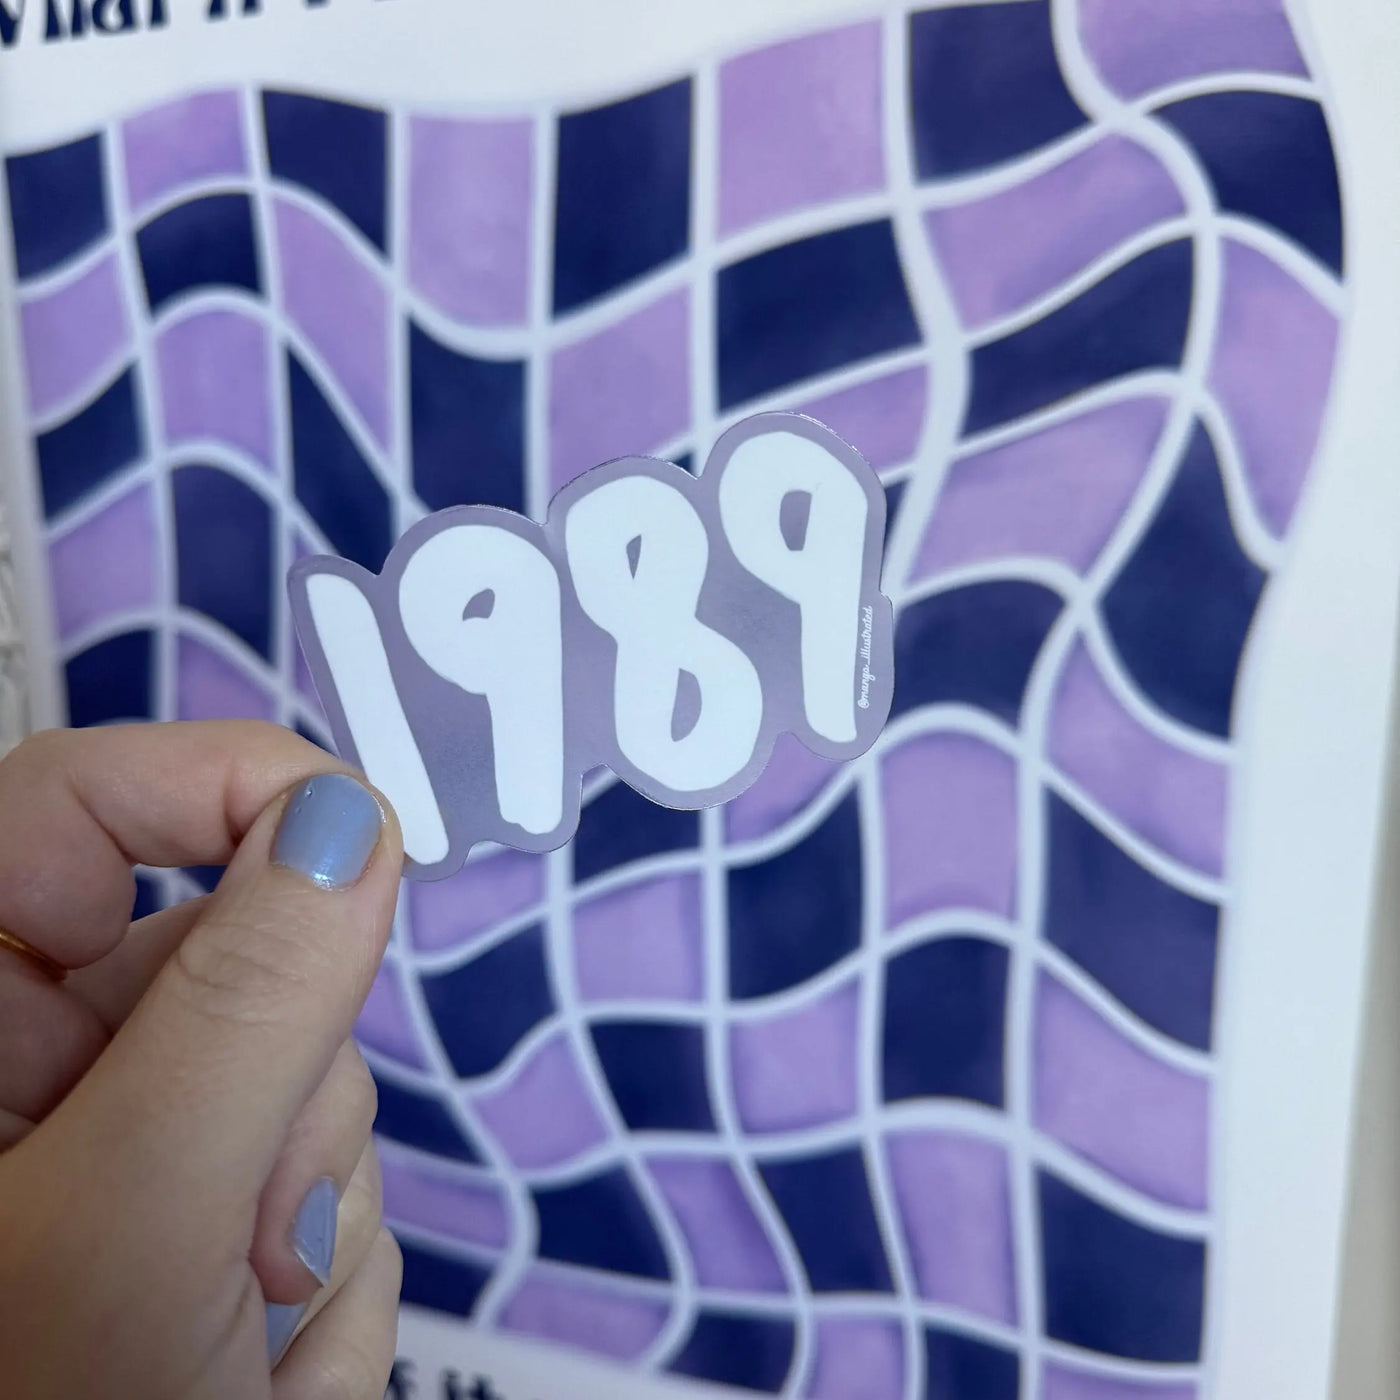 CLEAR 1989 sticker - white MangoIllustrated